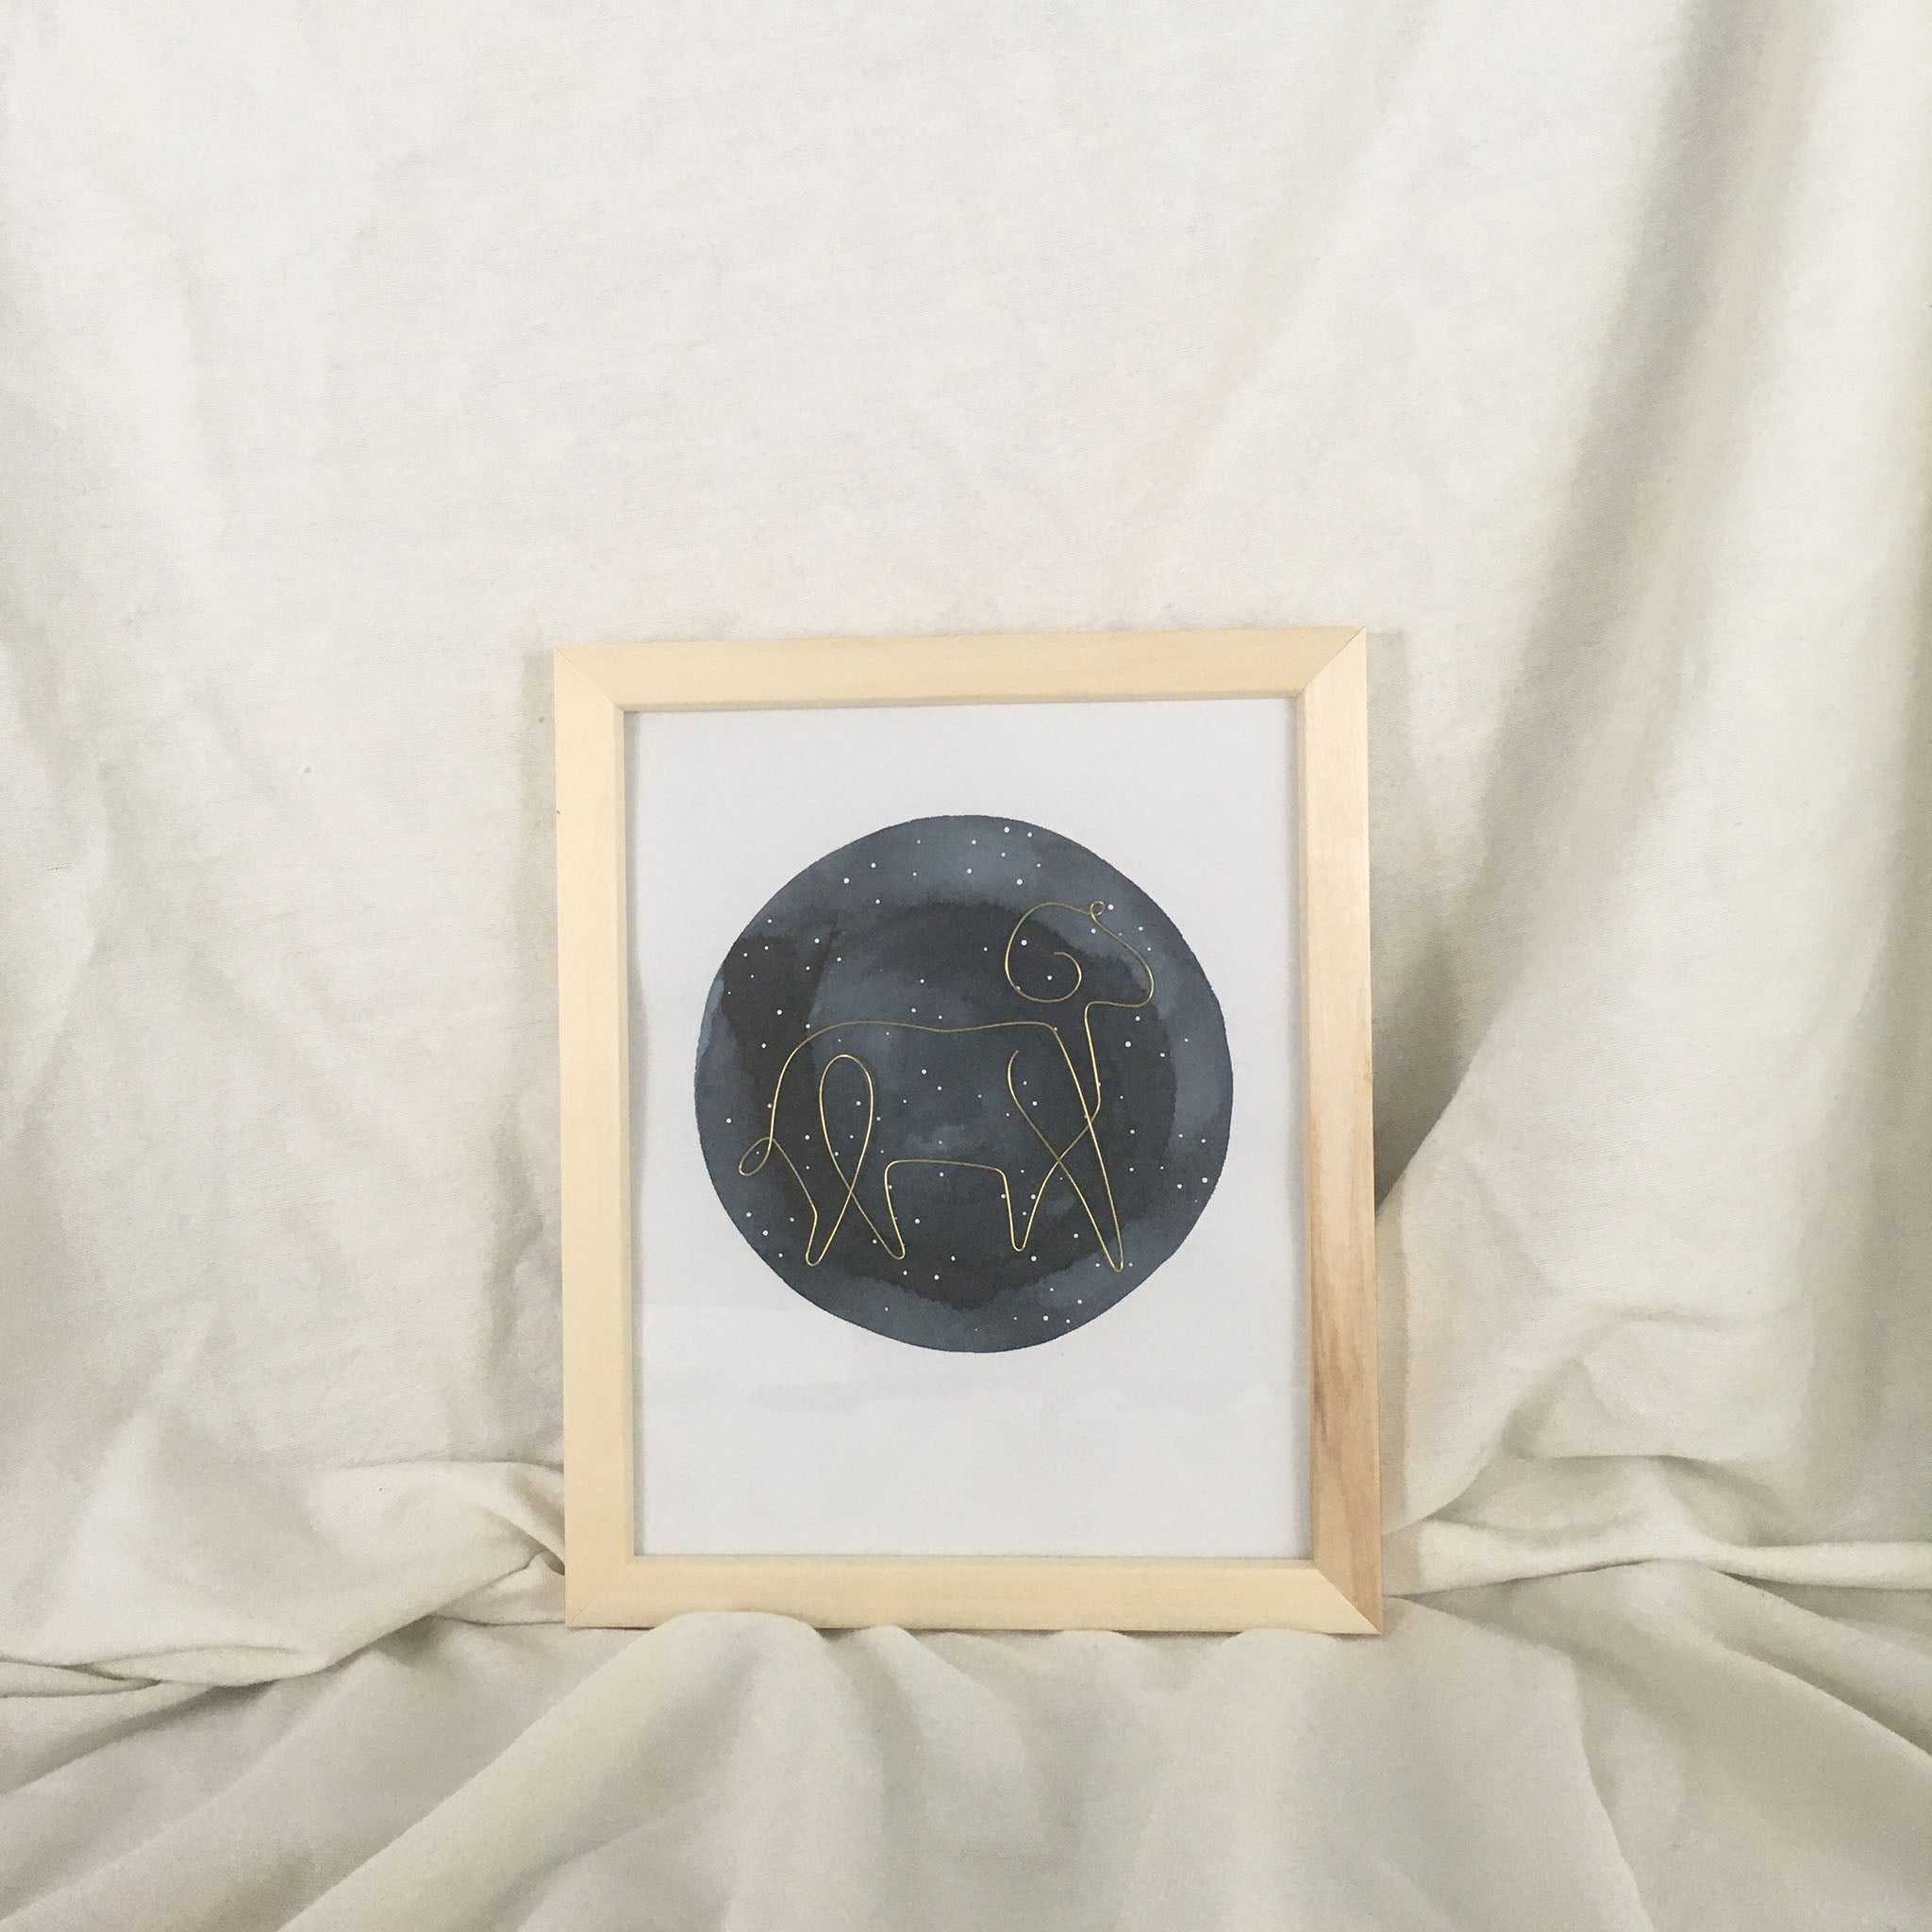 Aries wire art - natural frame, gold wire